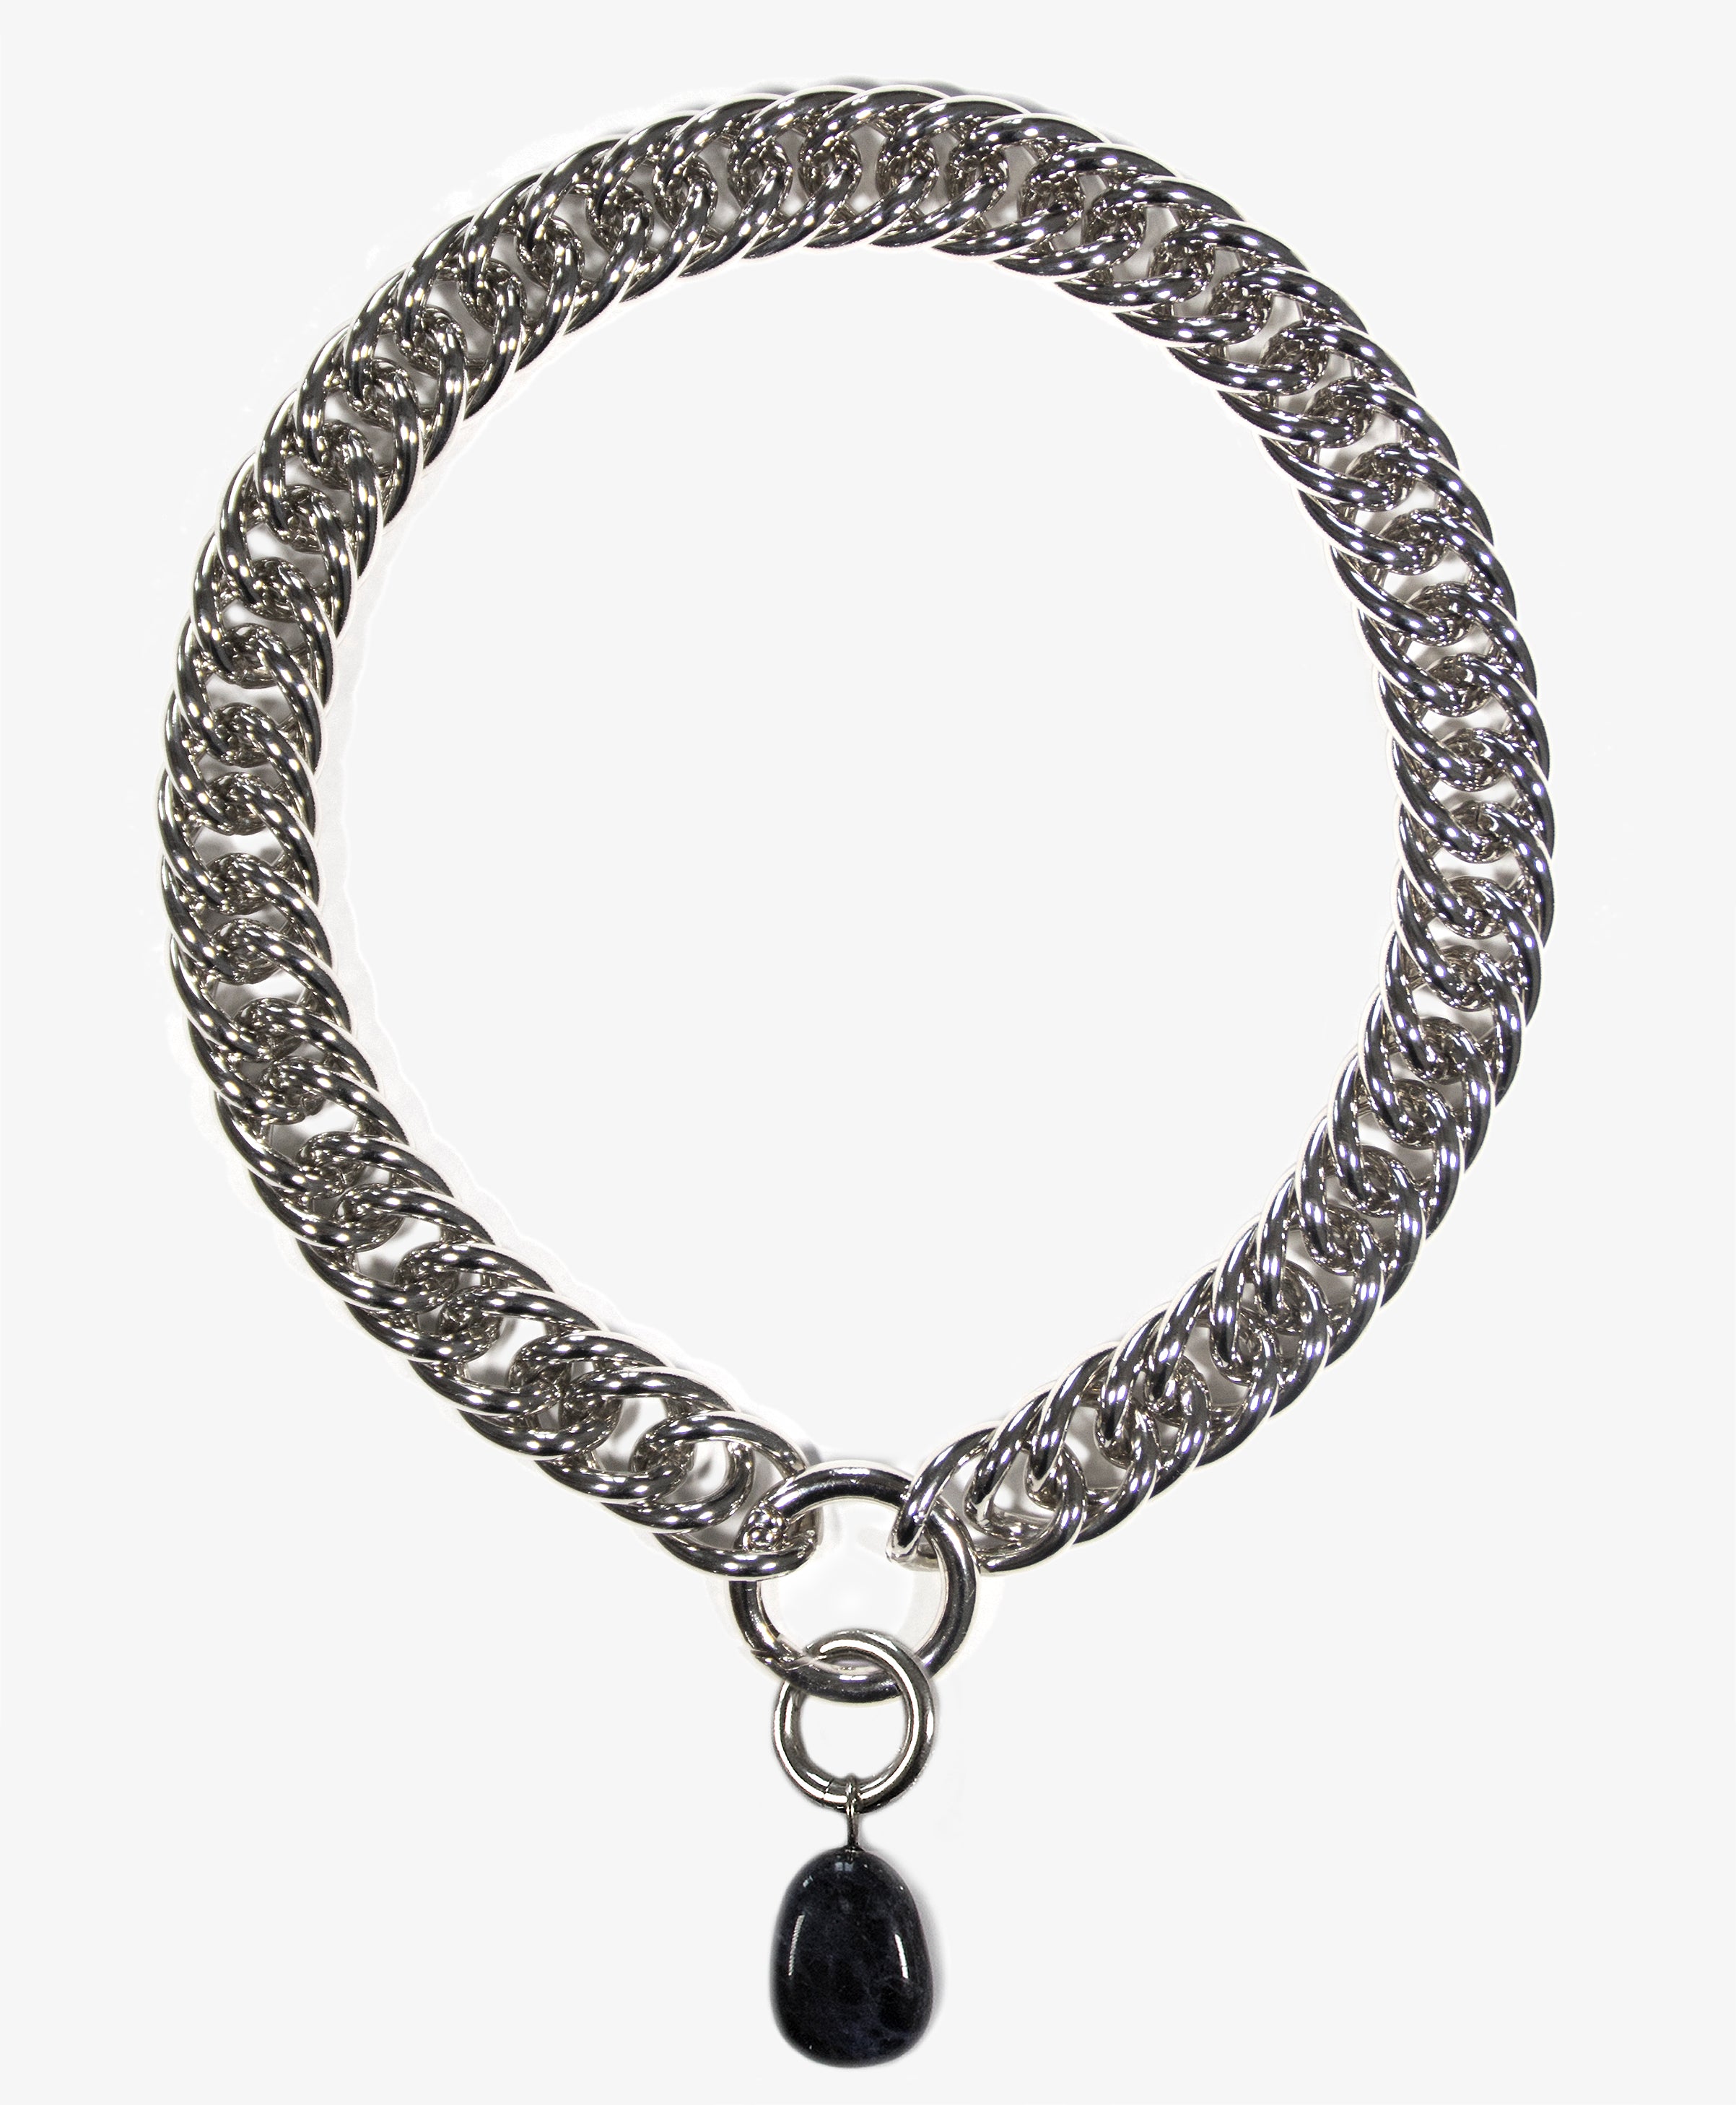 llayers-mens-women-jewelry-silver-stainlesssteel-choker-chain-necklace-unchained-006-Brooklyn-New-York-2